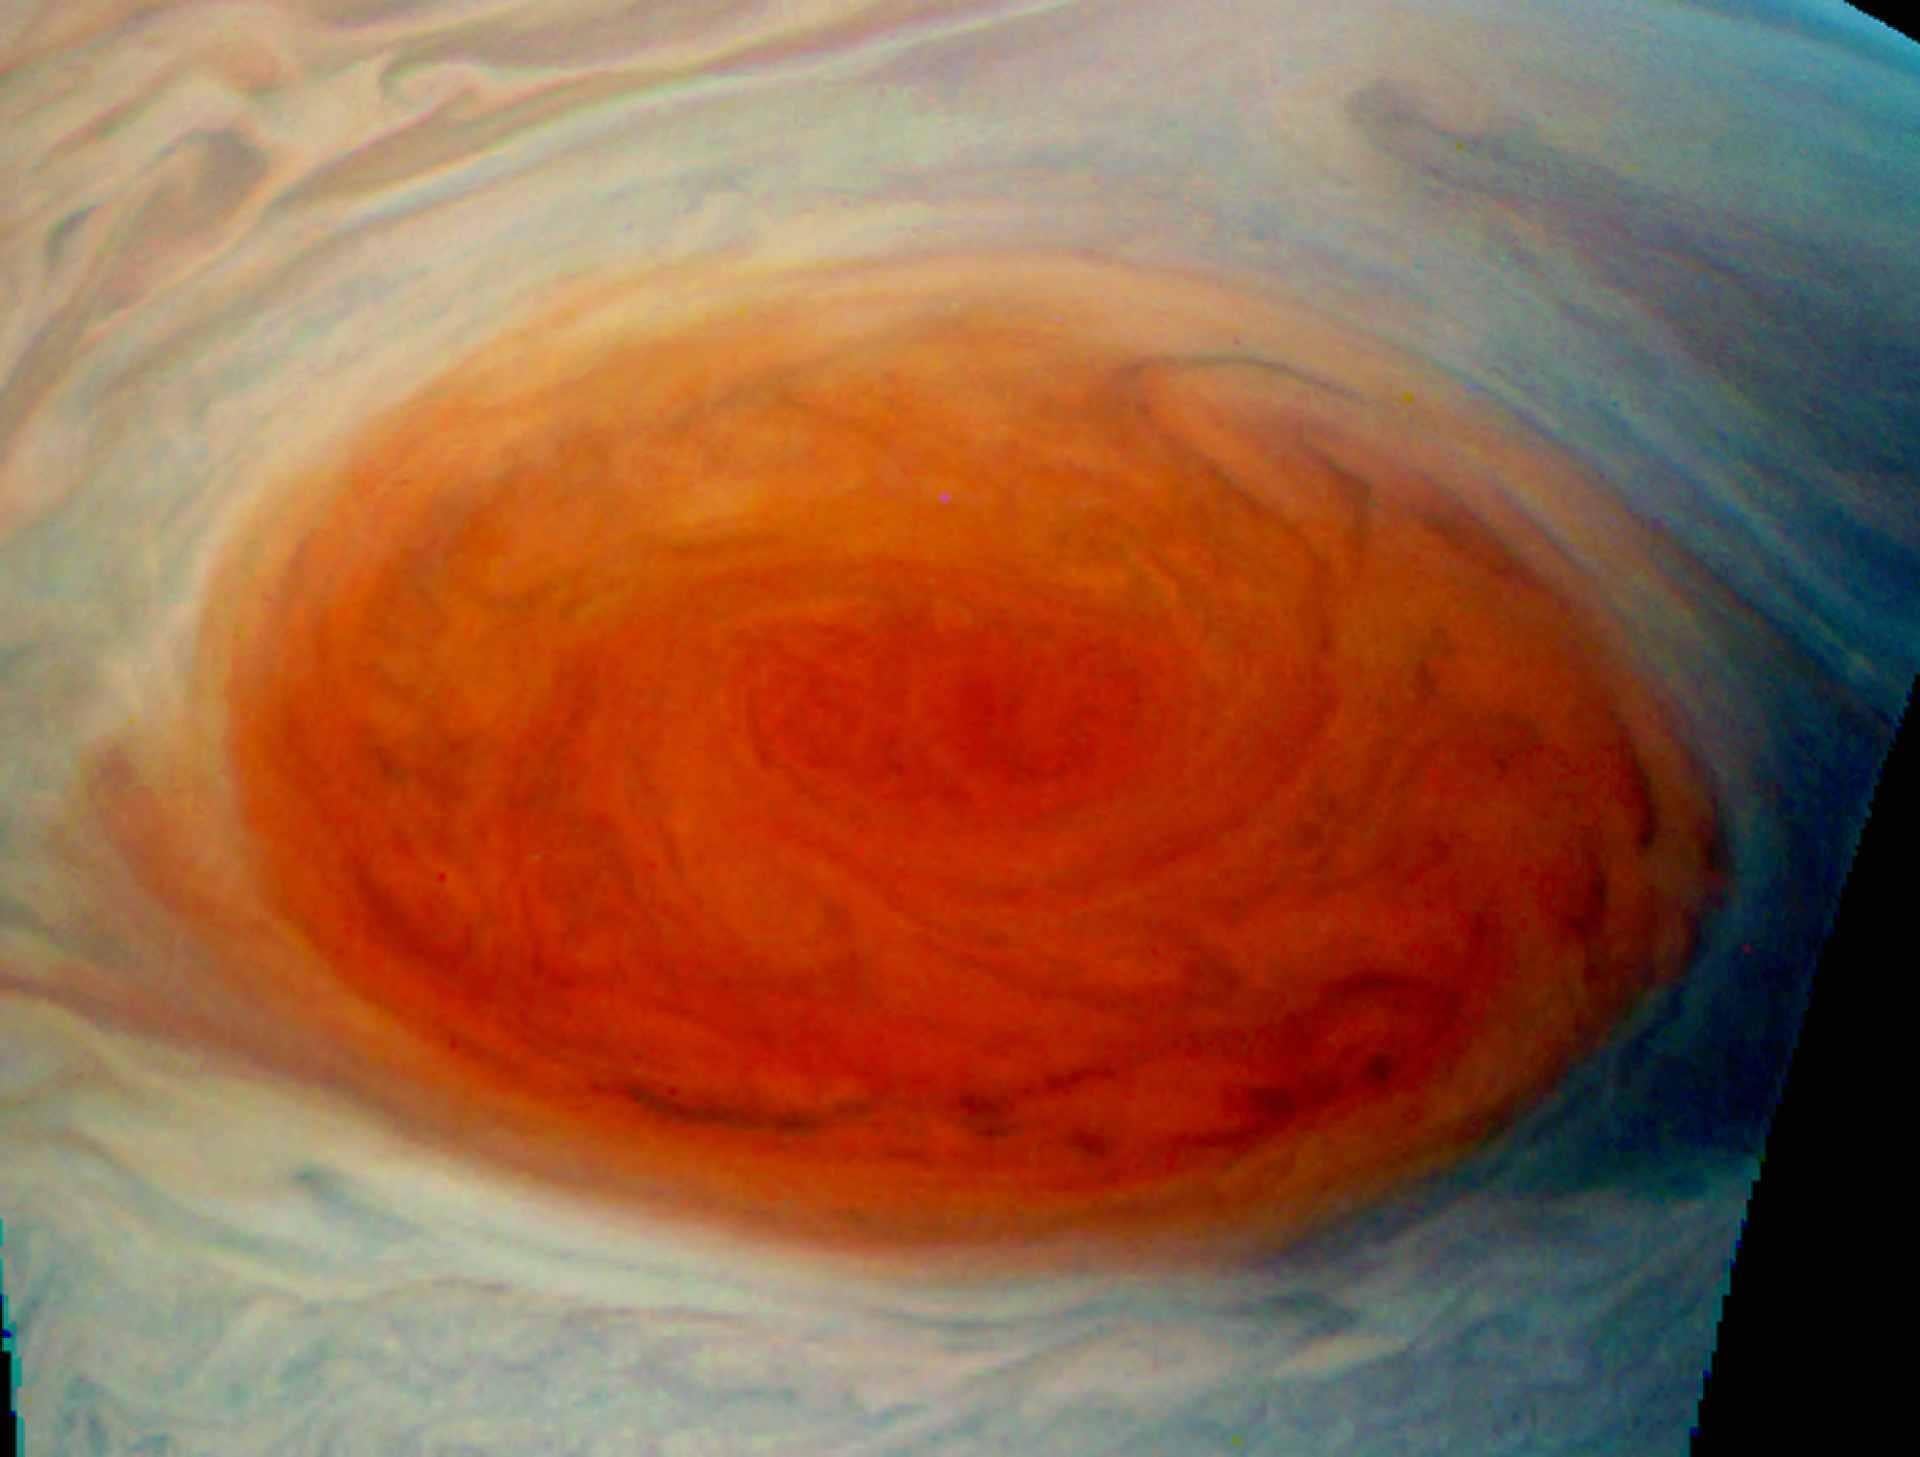 Nasa releases stunning images of Jupiter's great red spot